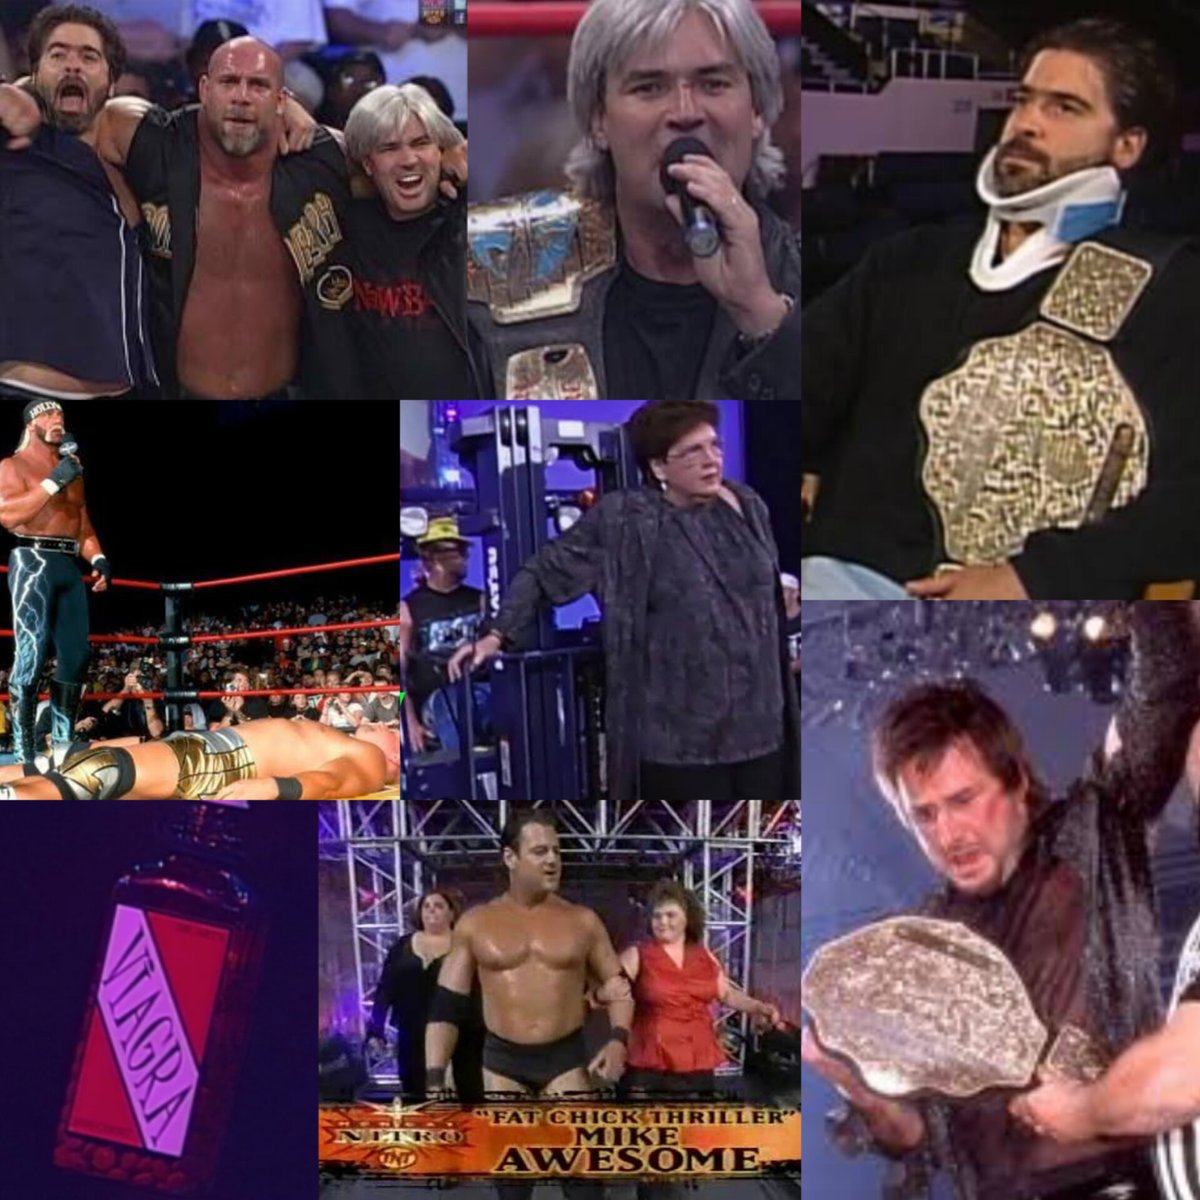 WCW 2000 comparisons should be banned for people who have never watched a single episode of WCW 2000.